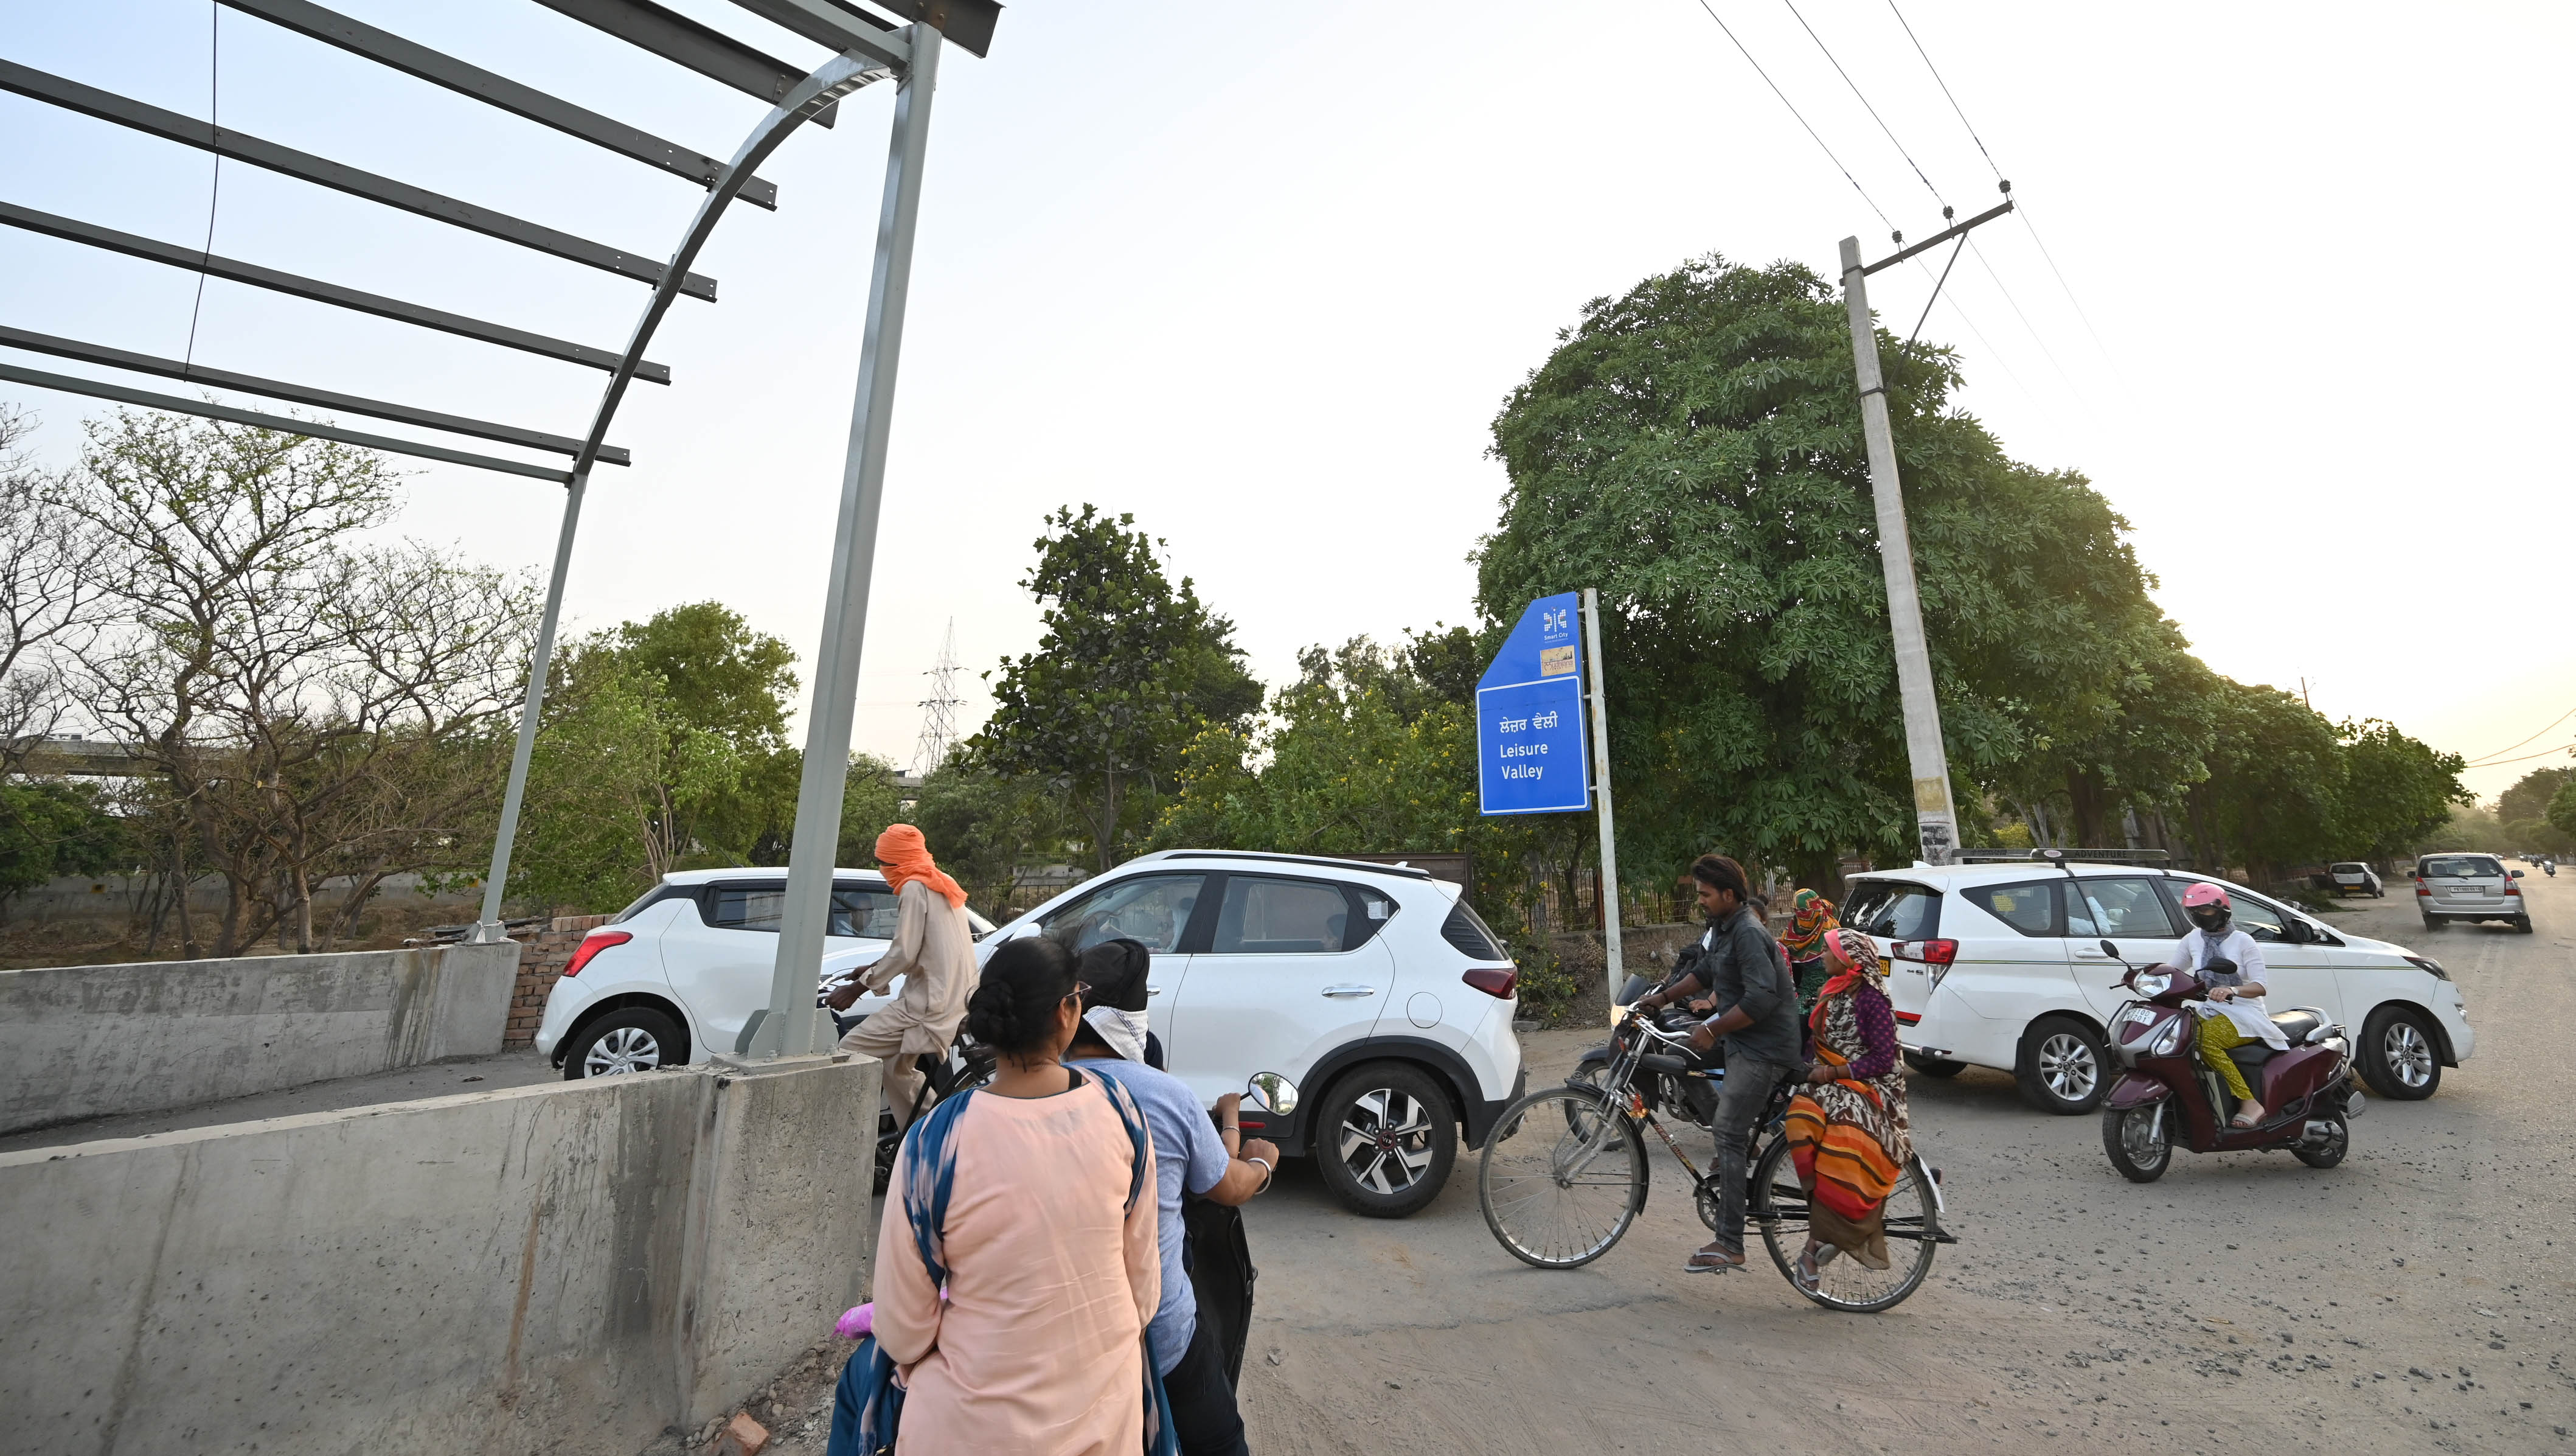 RUB sans signage; accidents, traffic jams occur daily